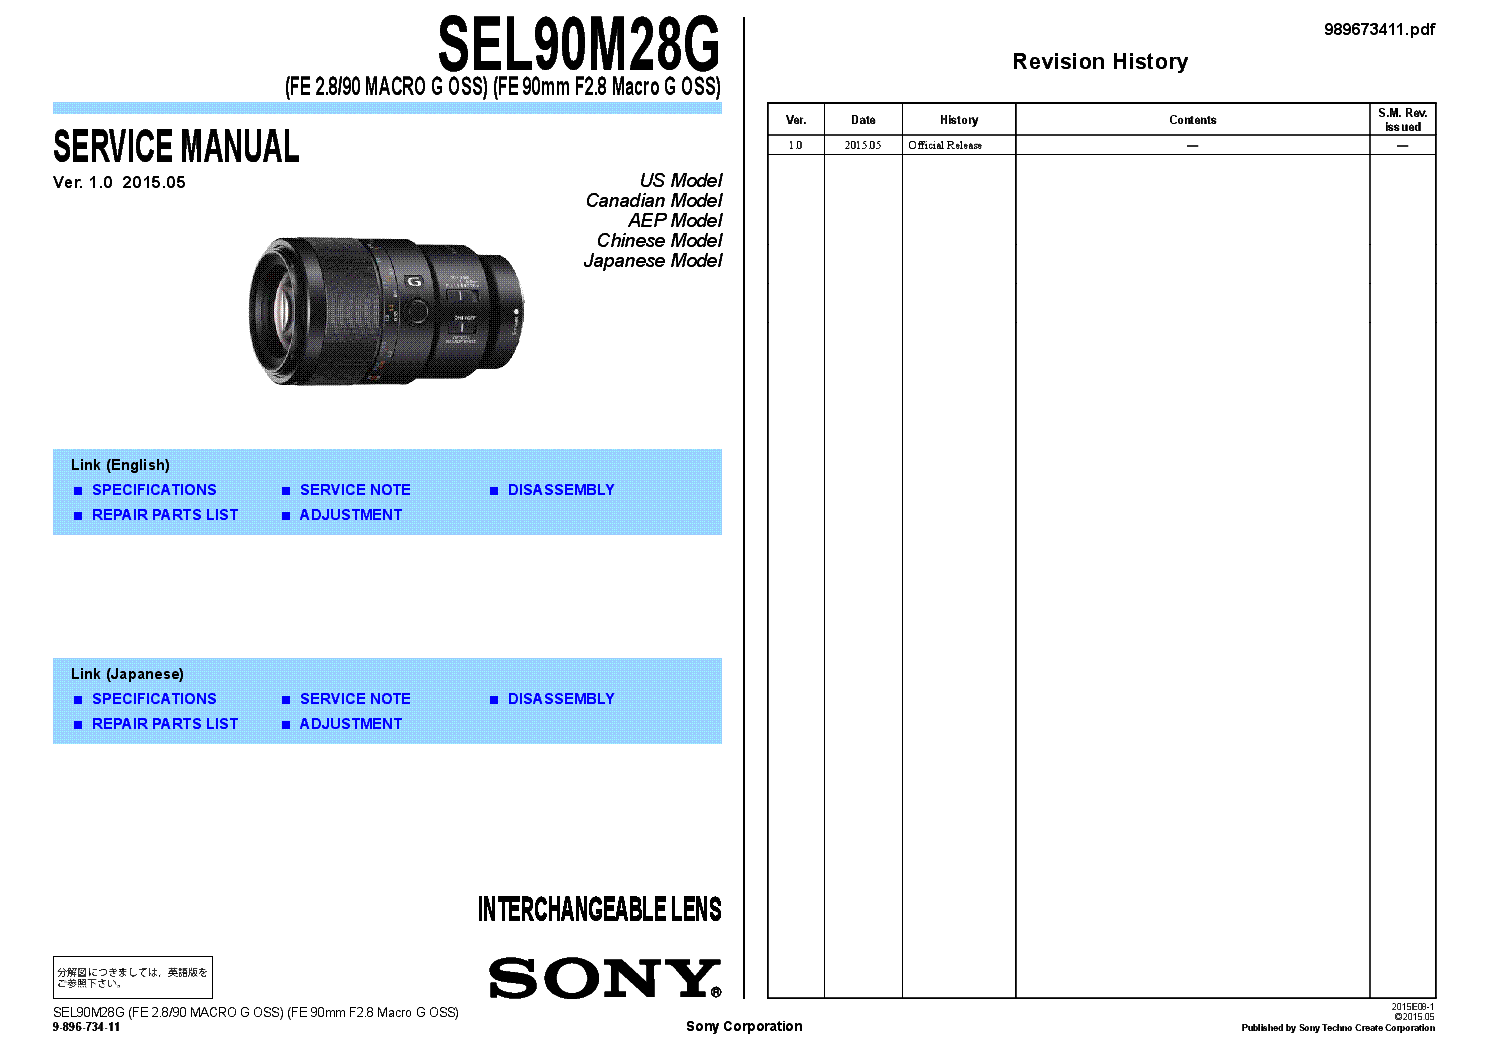 SONY SEL90M28G VER.1.0 SM service manual (1st page)